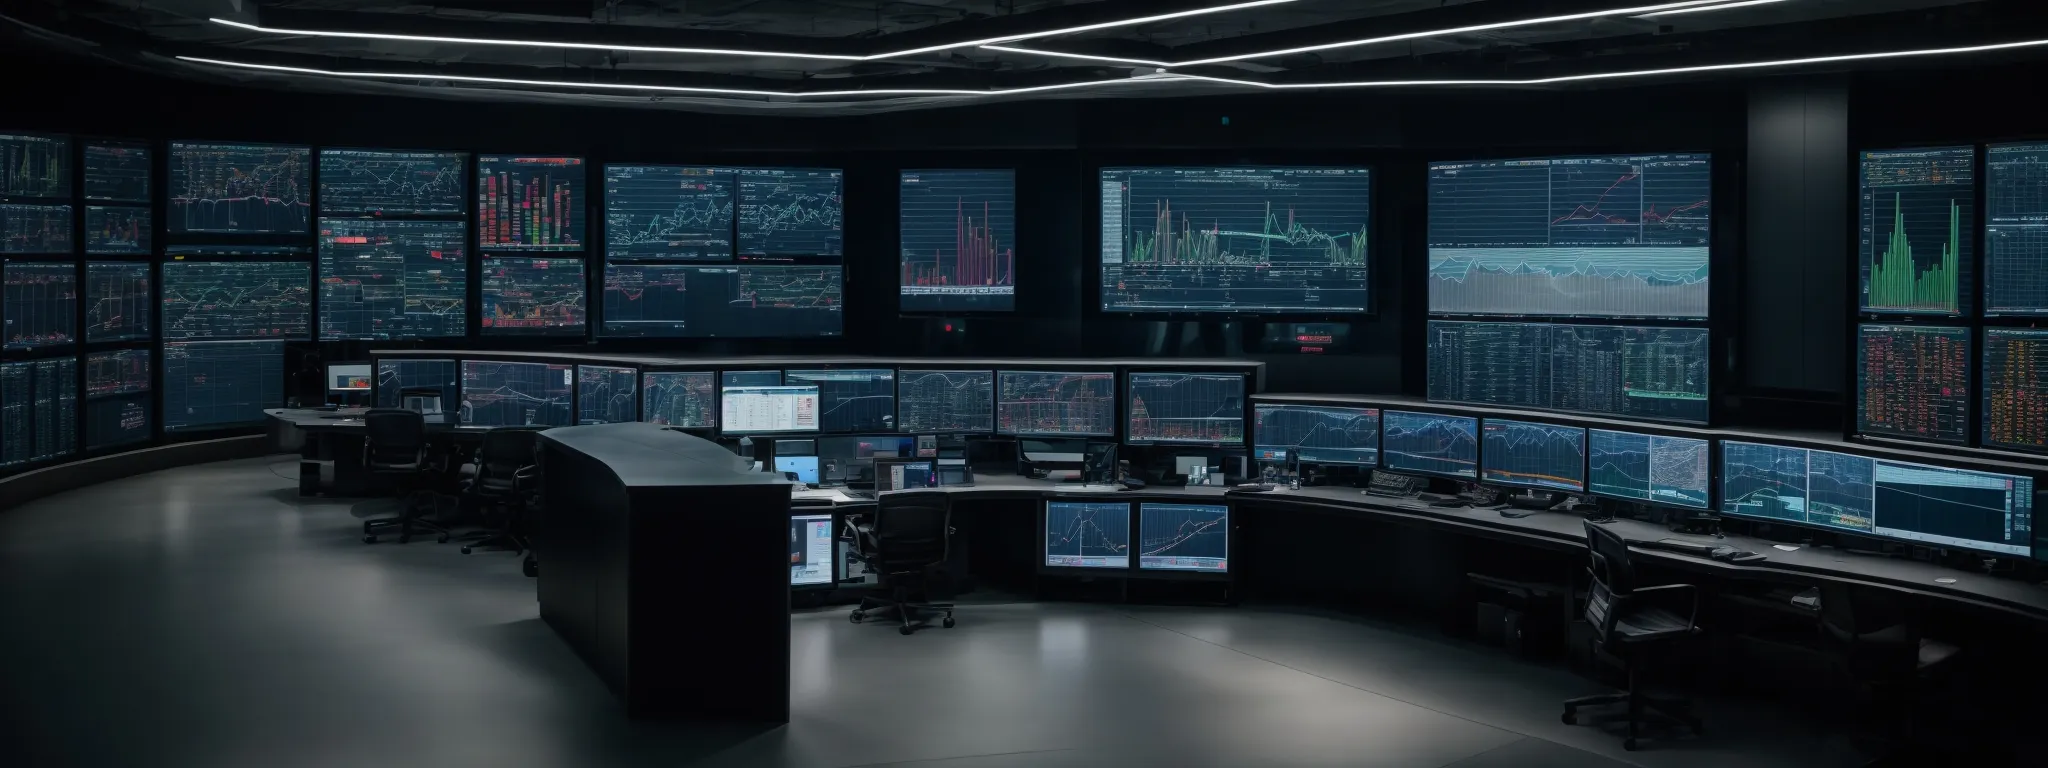 a modern, high-tech control room with large screens displaying complex data analytics and graphs.